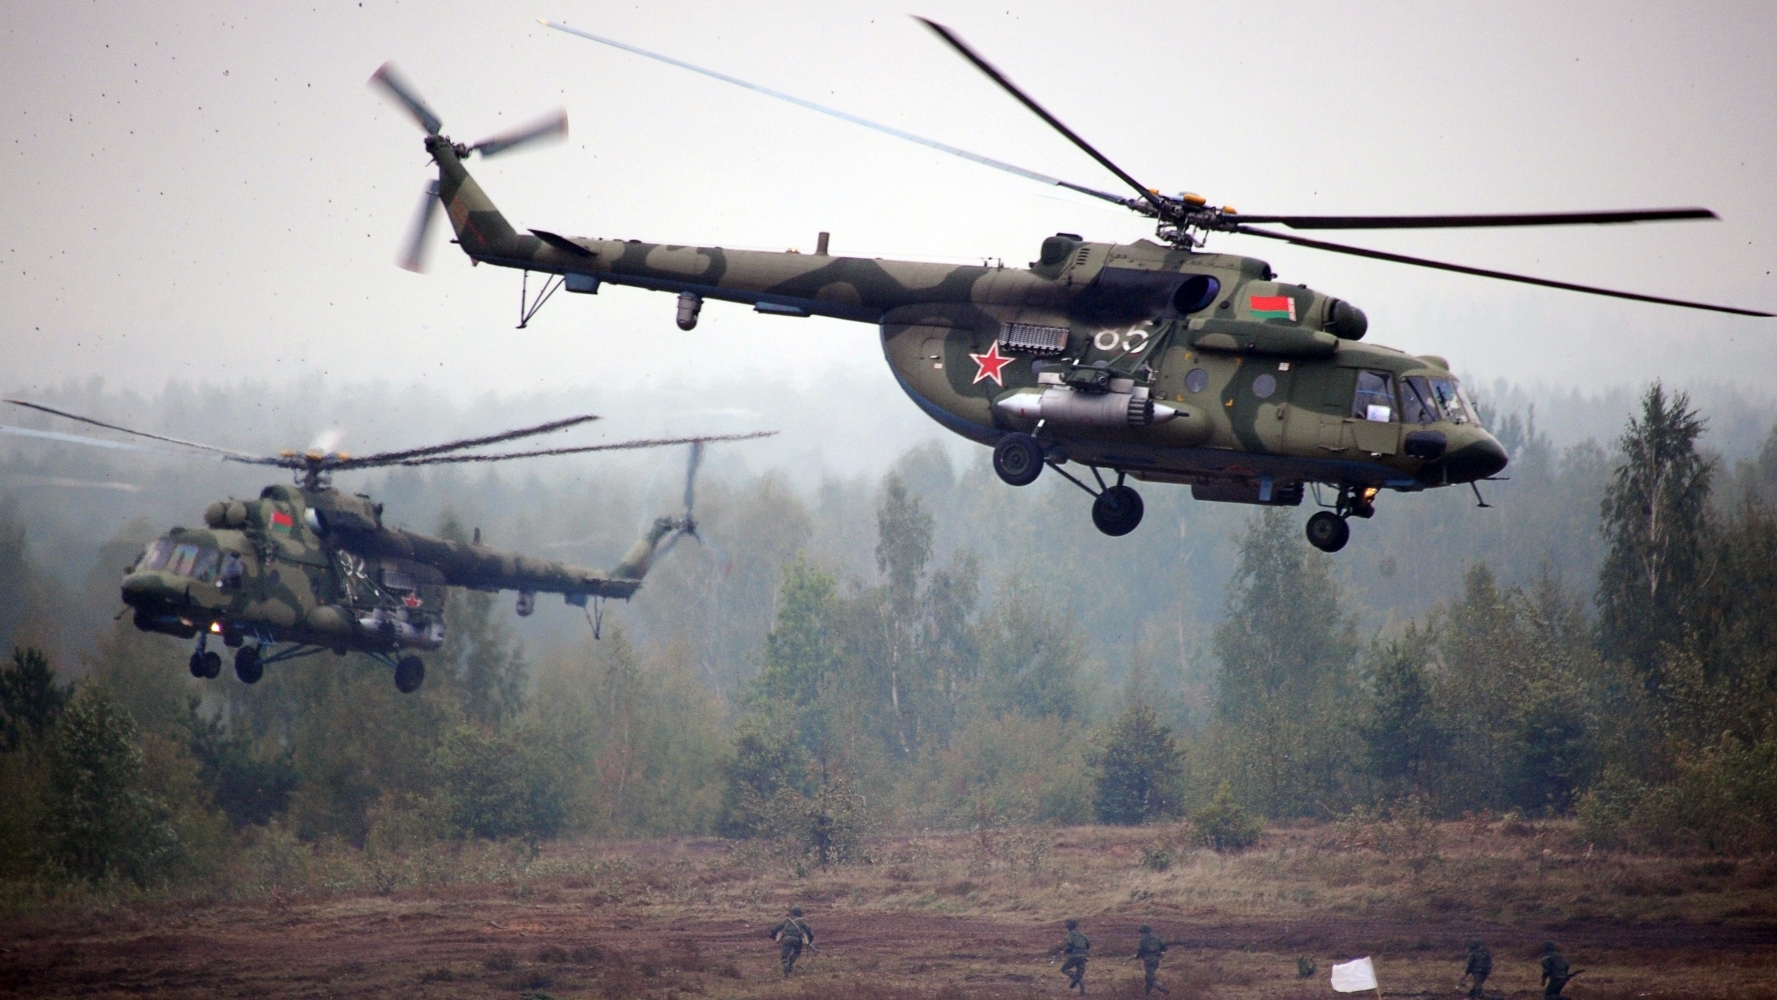 Russian helicopters left Belarus. They are close to the border with Ukraine